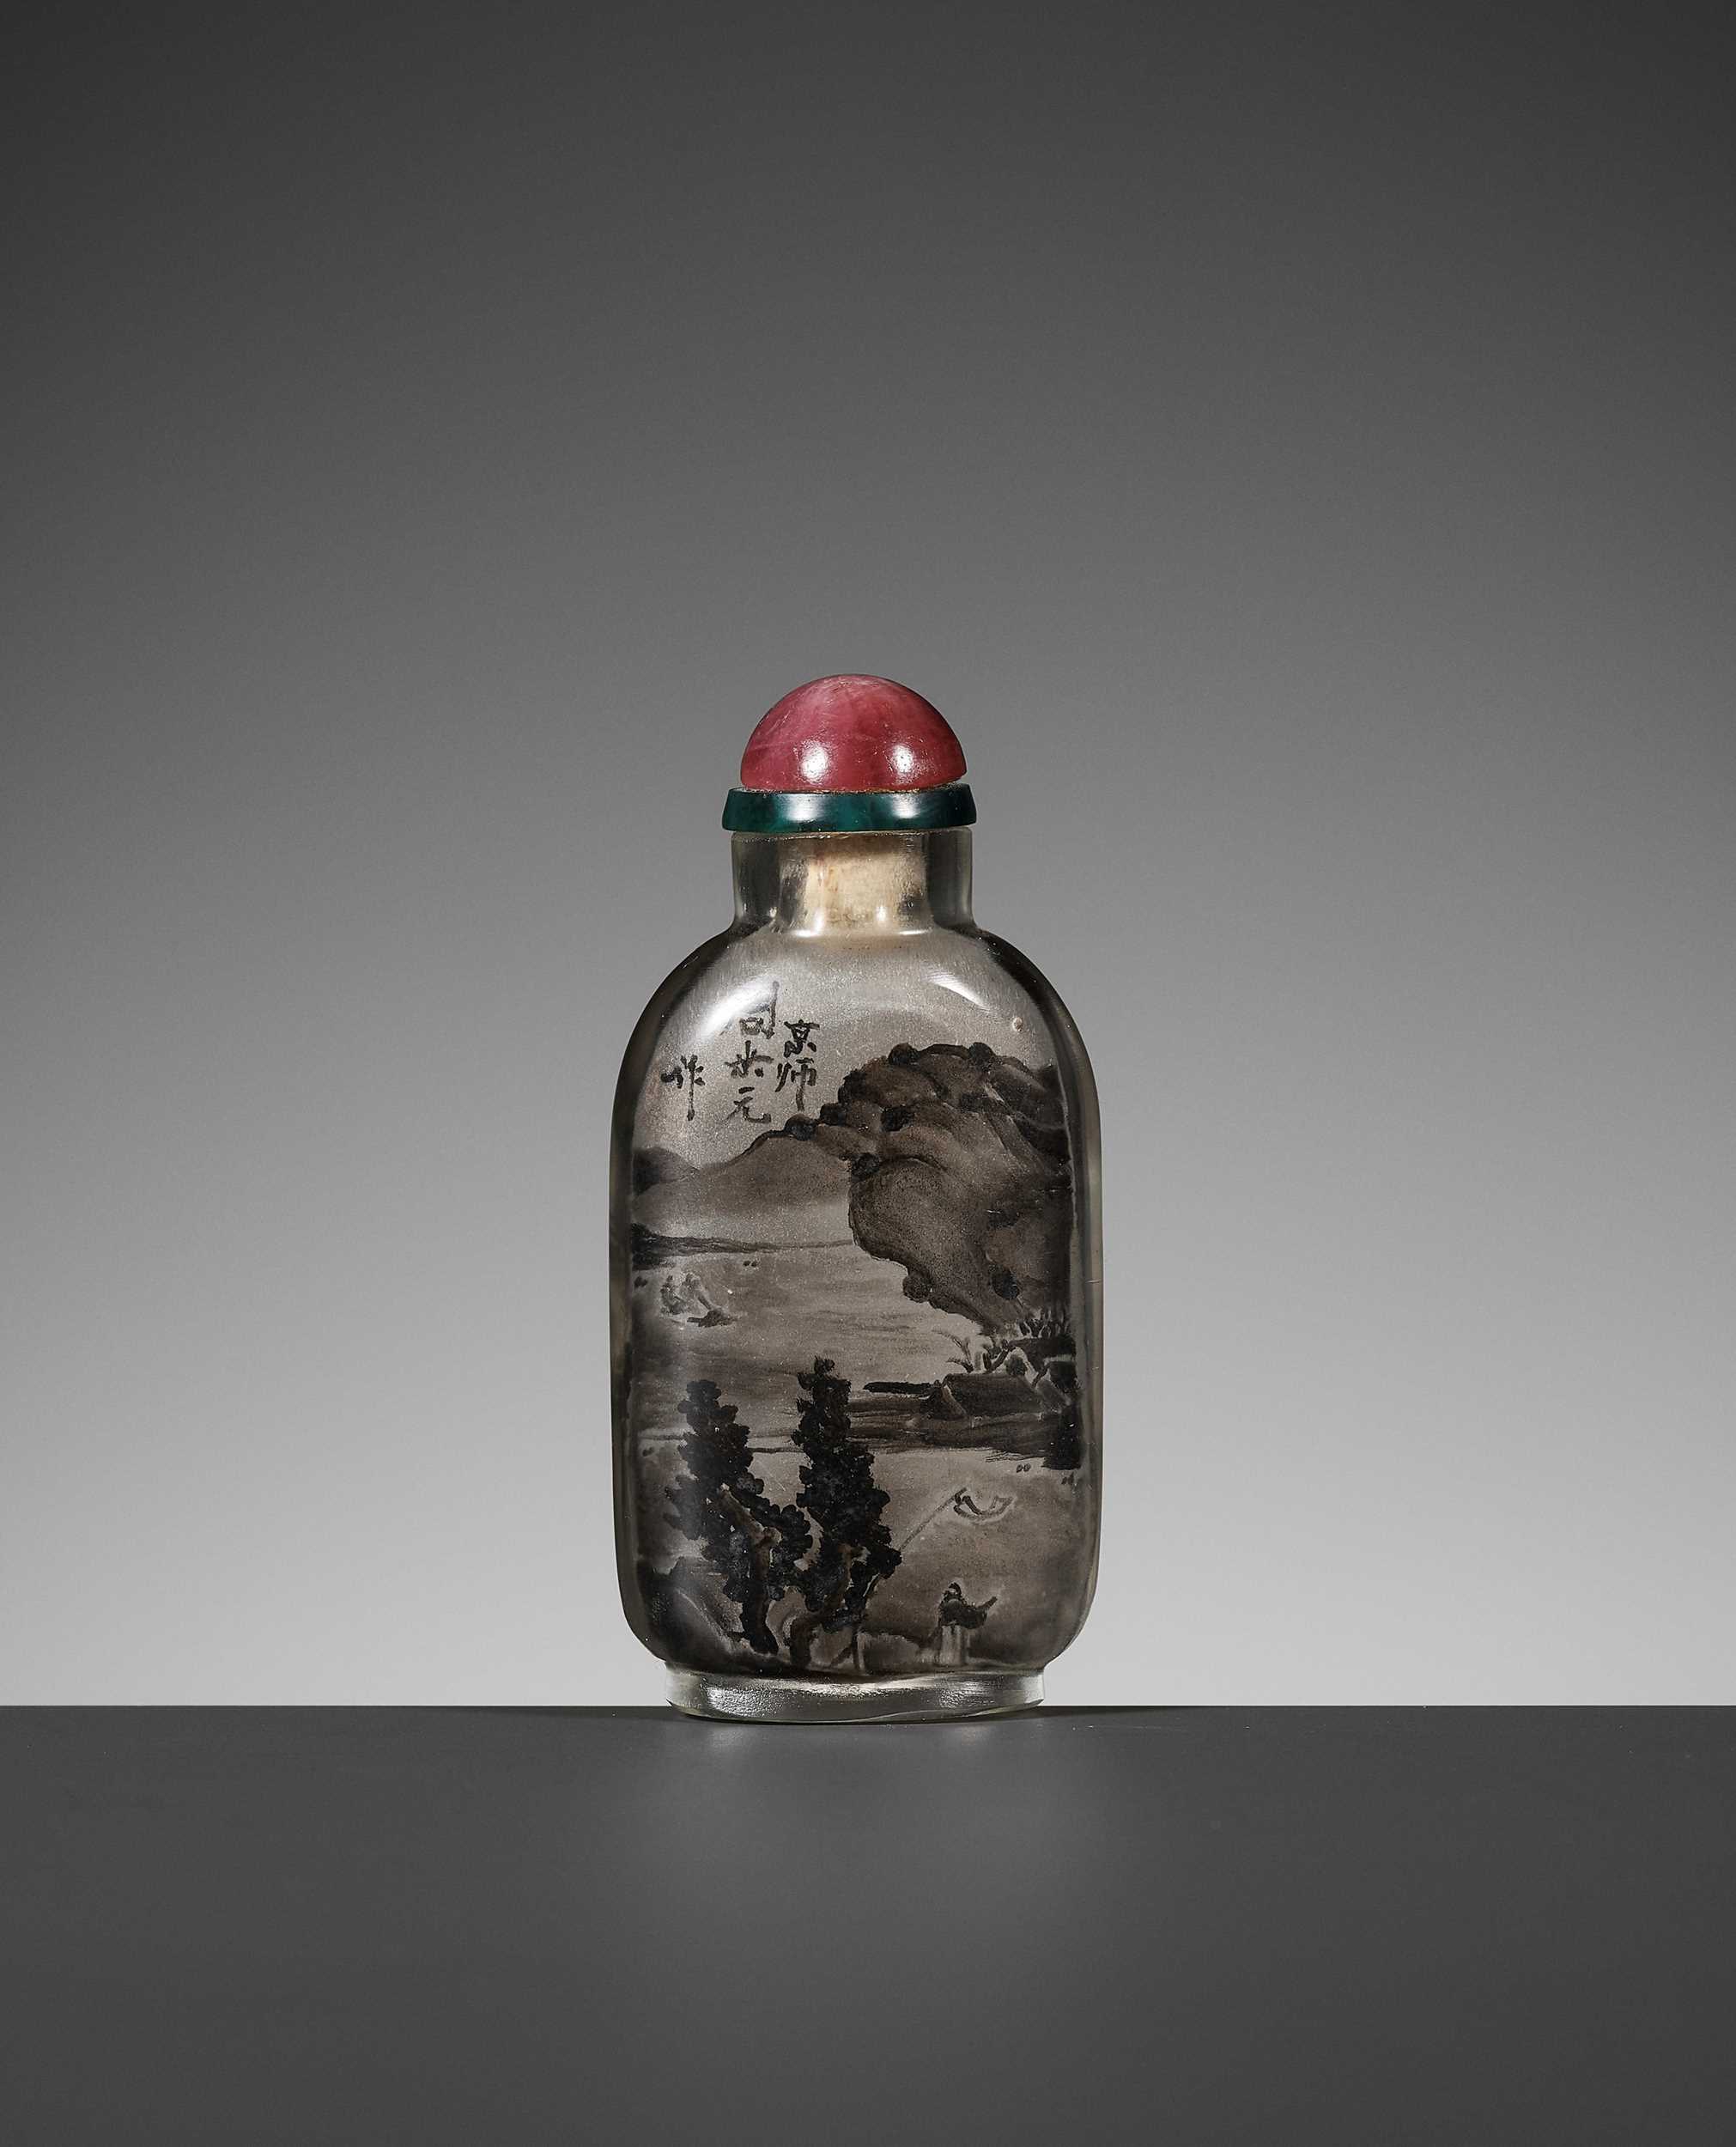 Lot 148 - A MINIATURE INTERIOR-PAINTED GLASS SNUFF BOTTLE, BY YAN YUTIAN